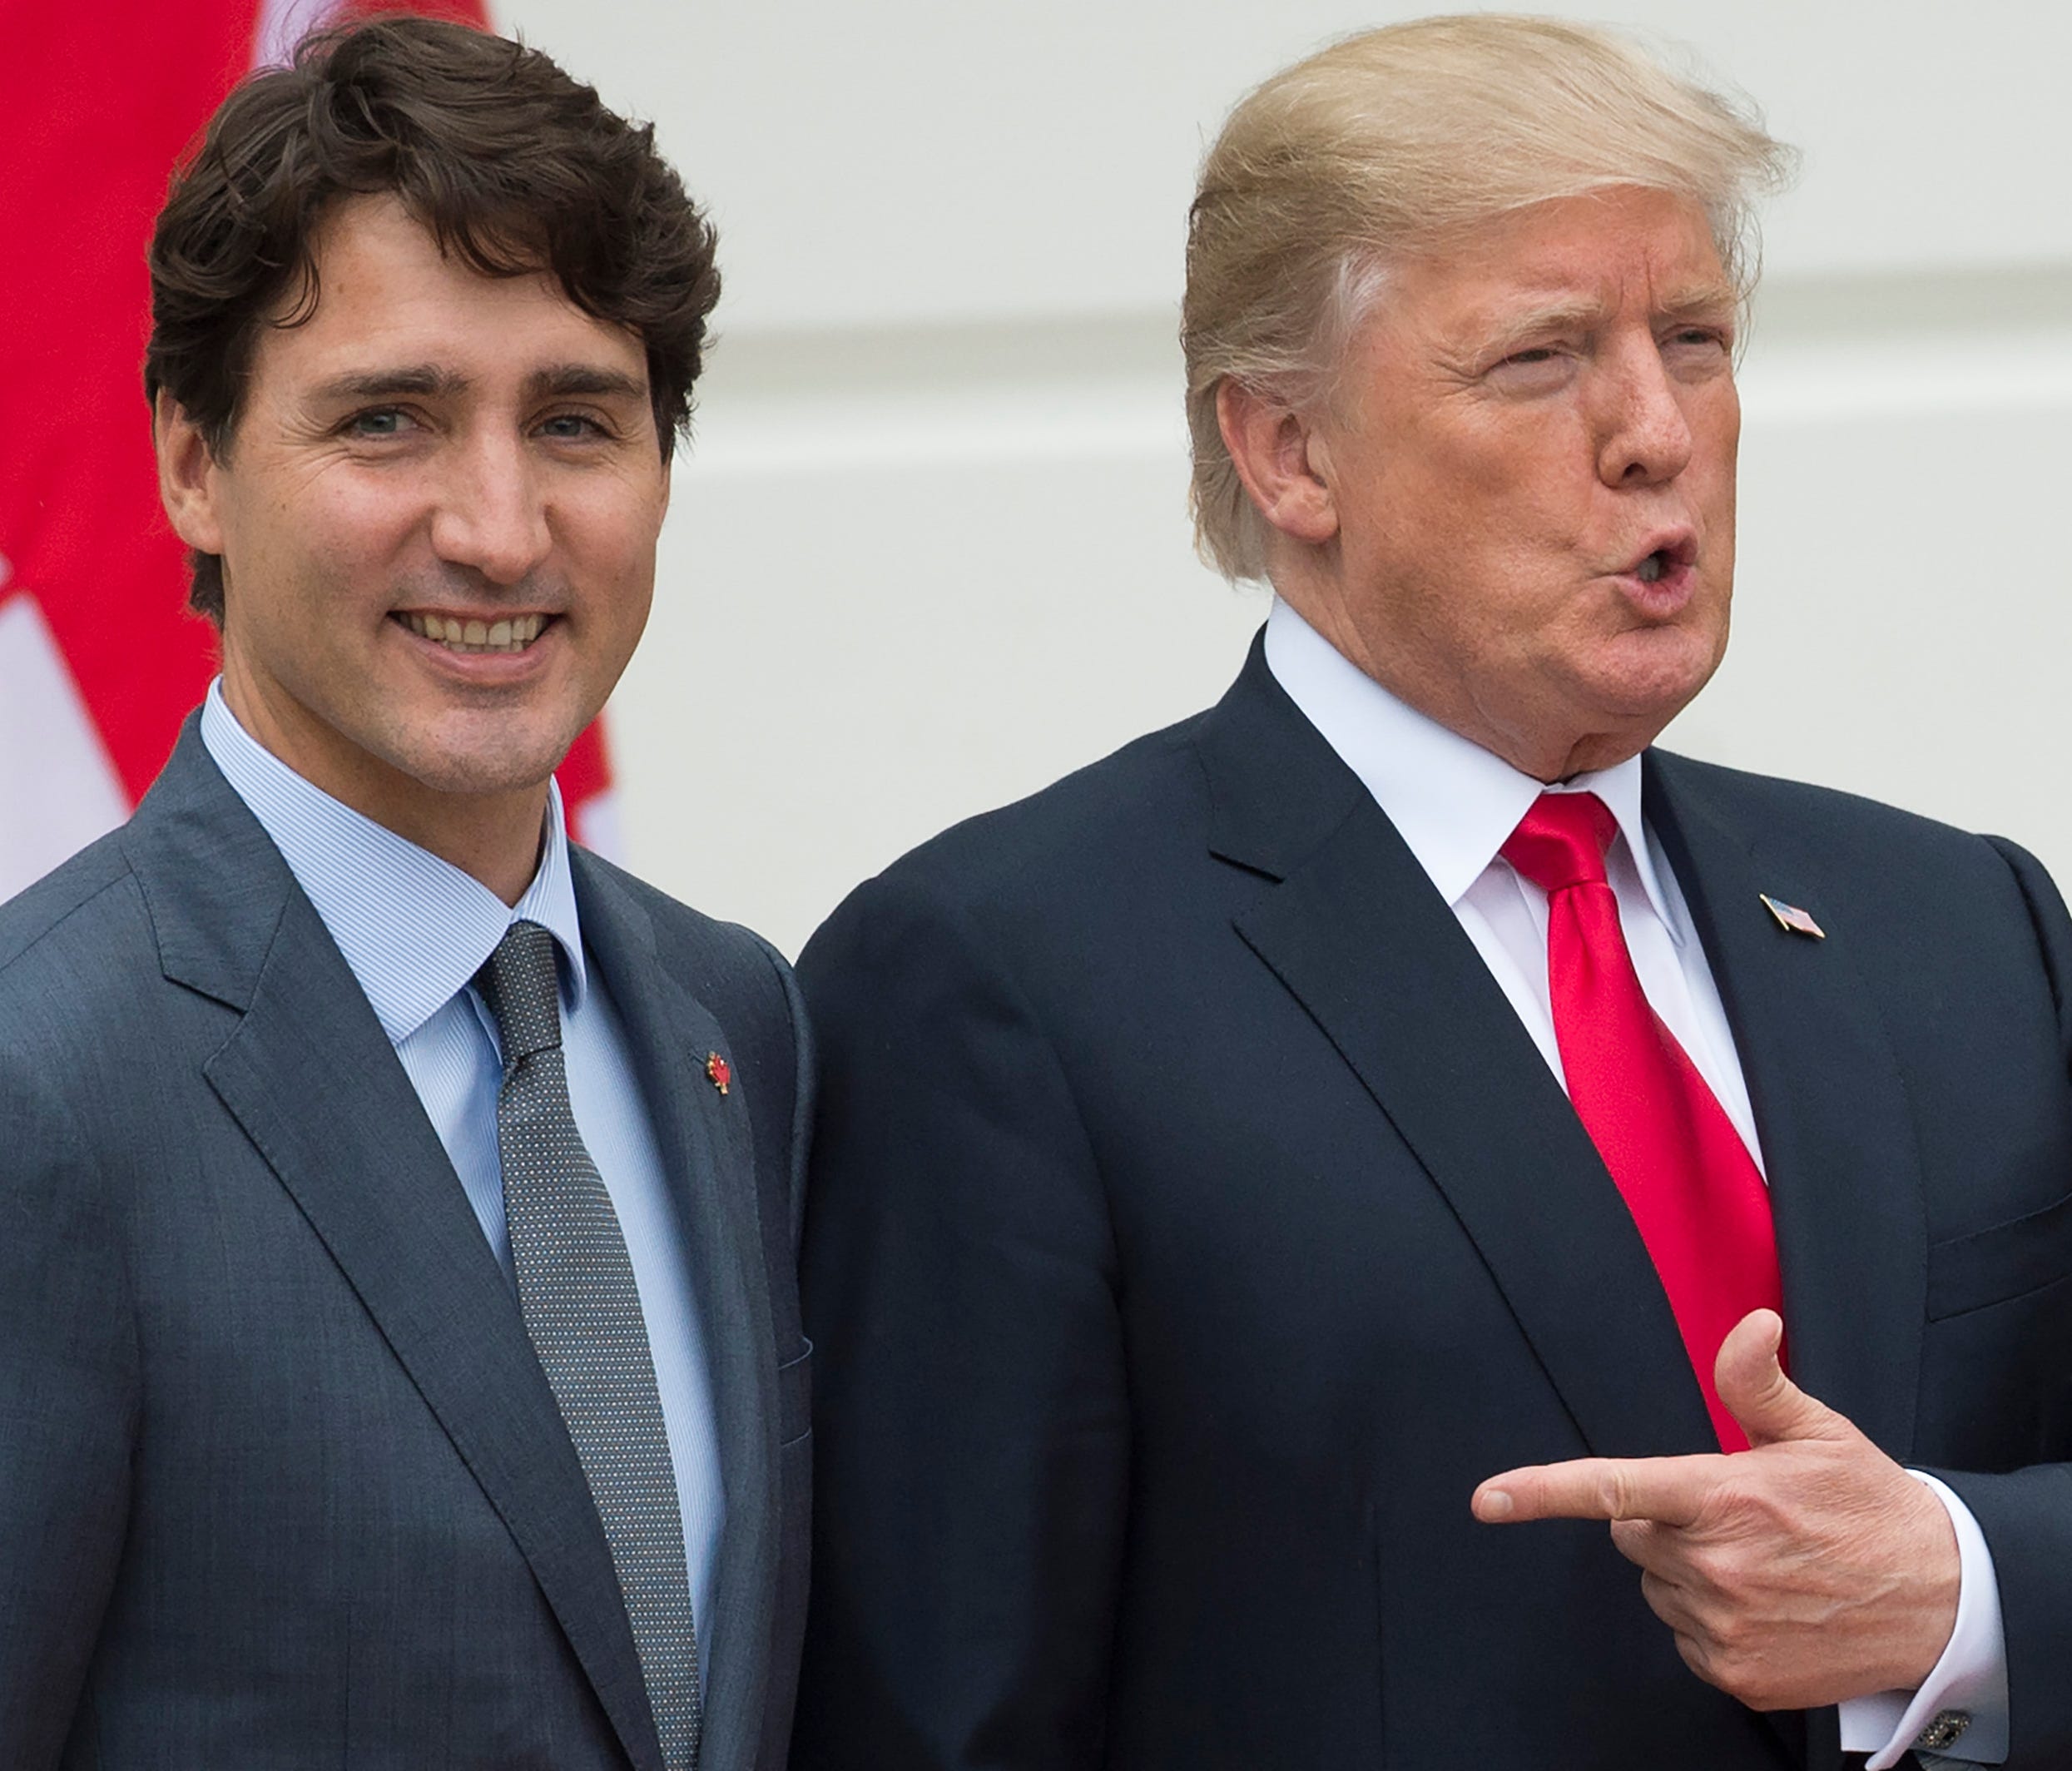 President Trump welcomes Canadian Prime Minister Justin Trudeau at the White House in Washington, D.C., on Oct. 11, 2017.